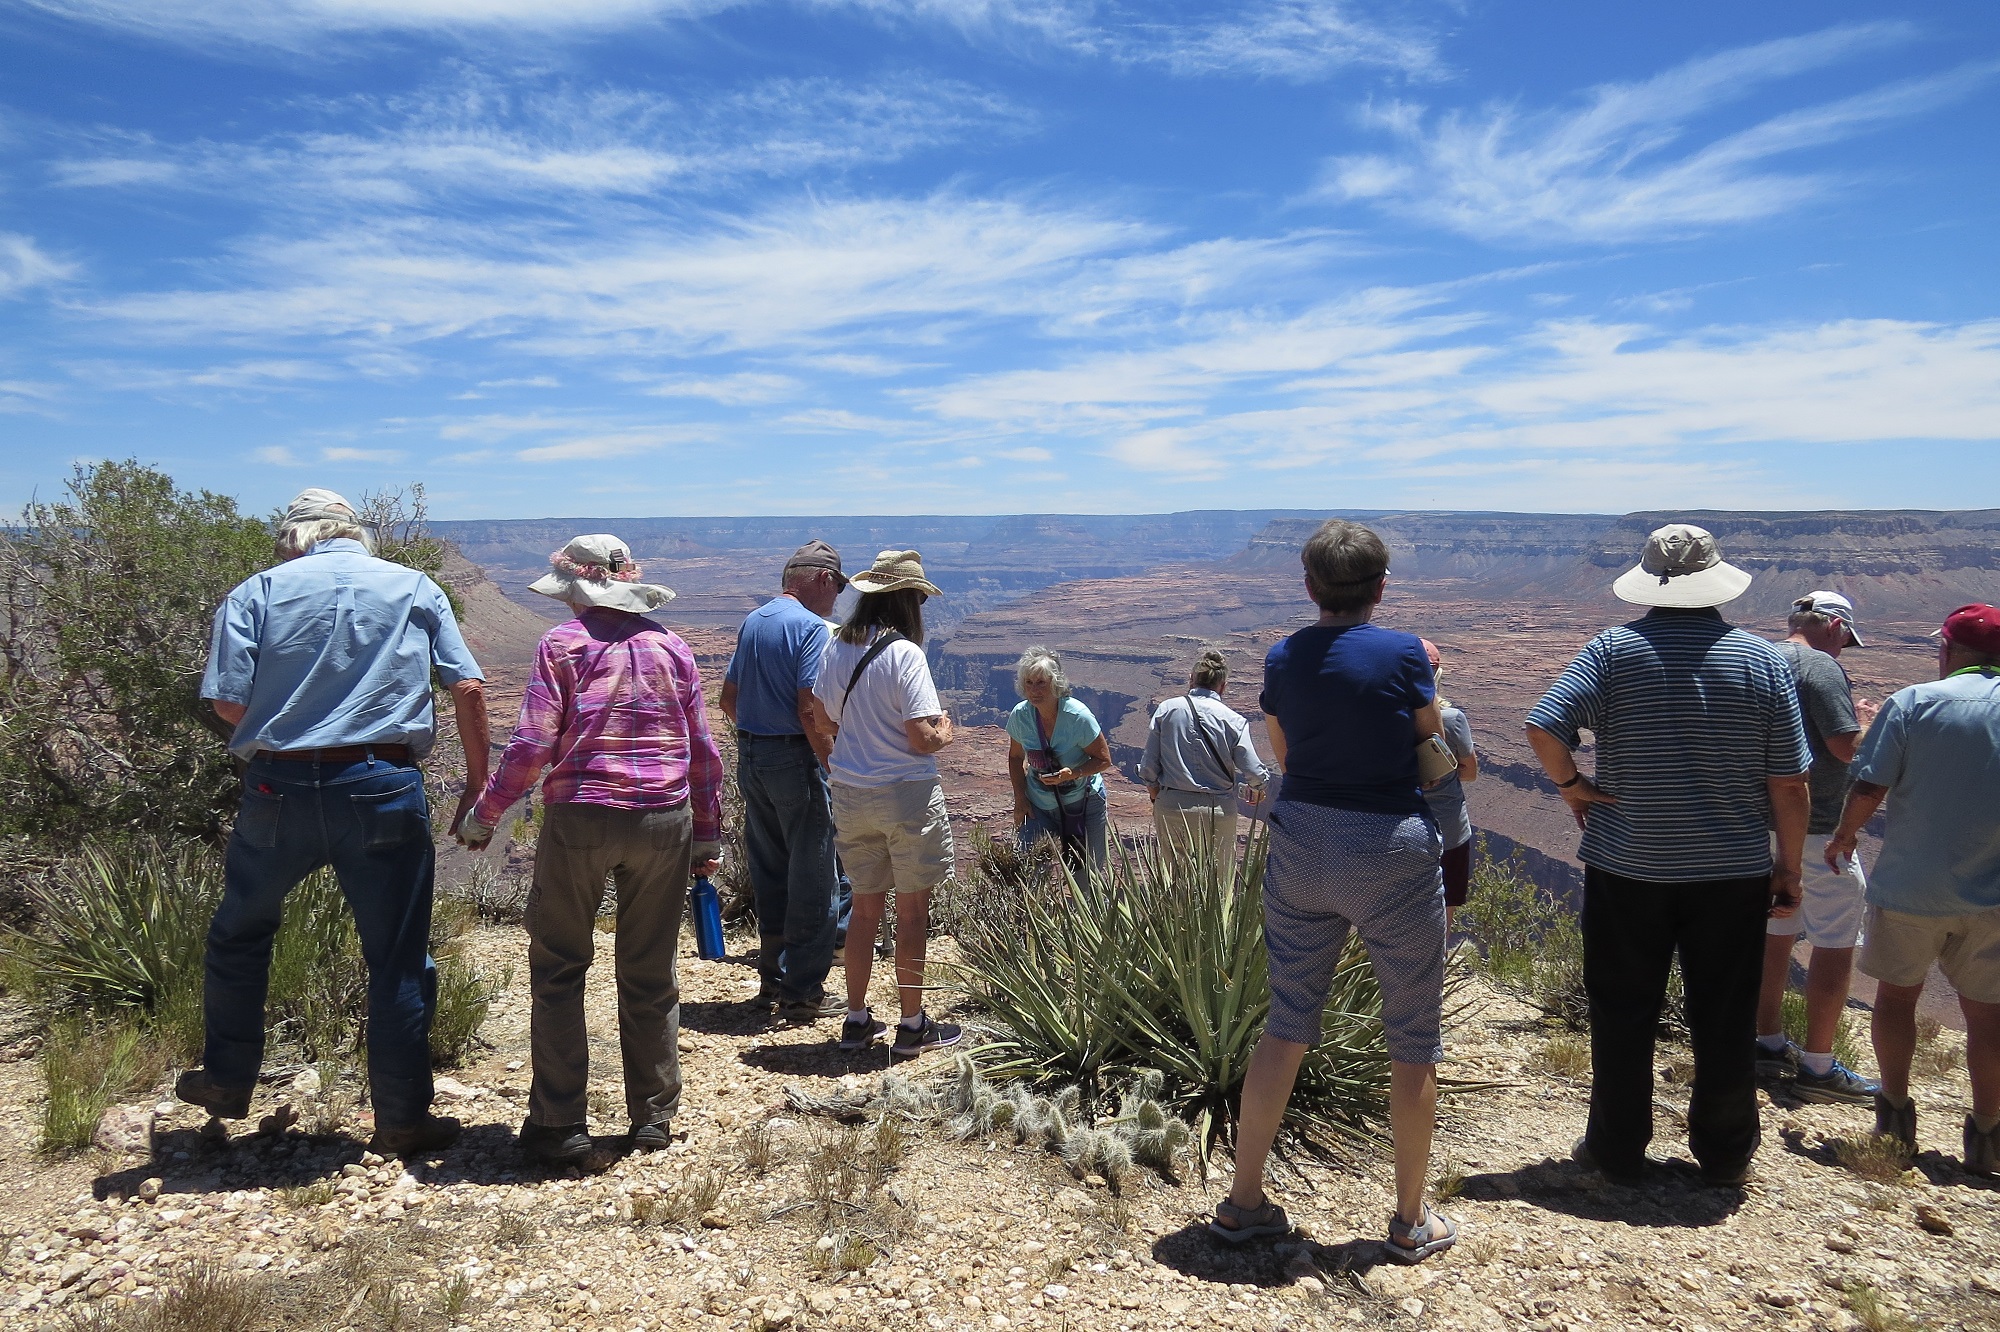 DASIA field trip participants looking out on Kanab Point on the Arizona Strip